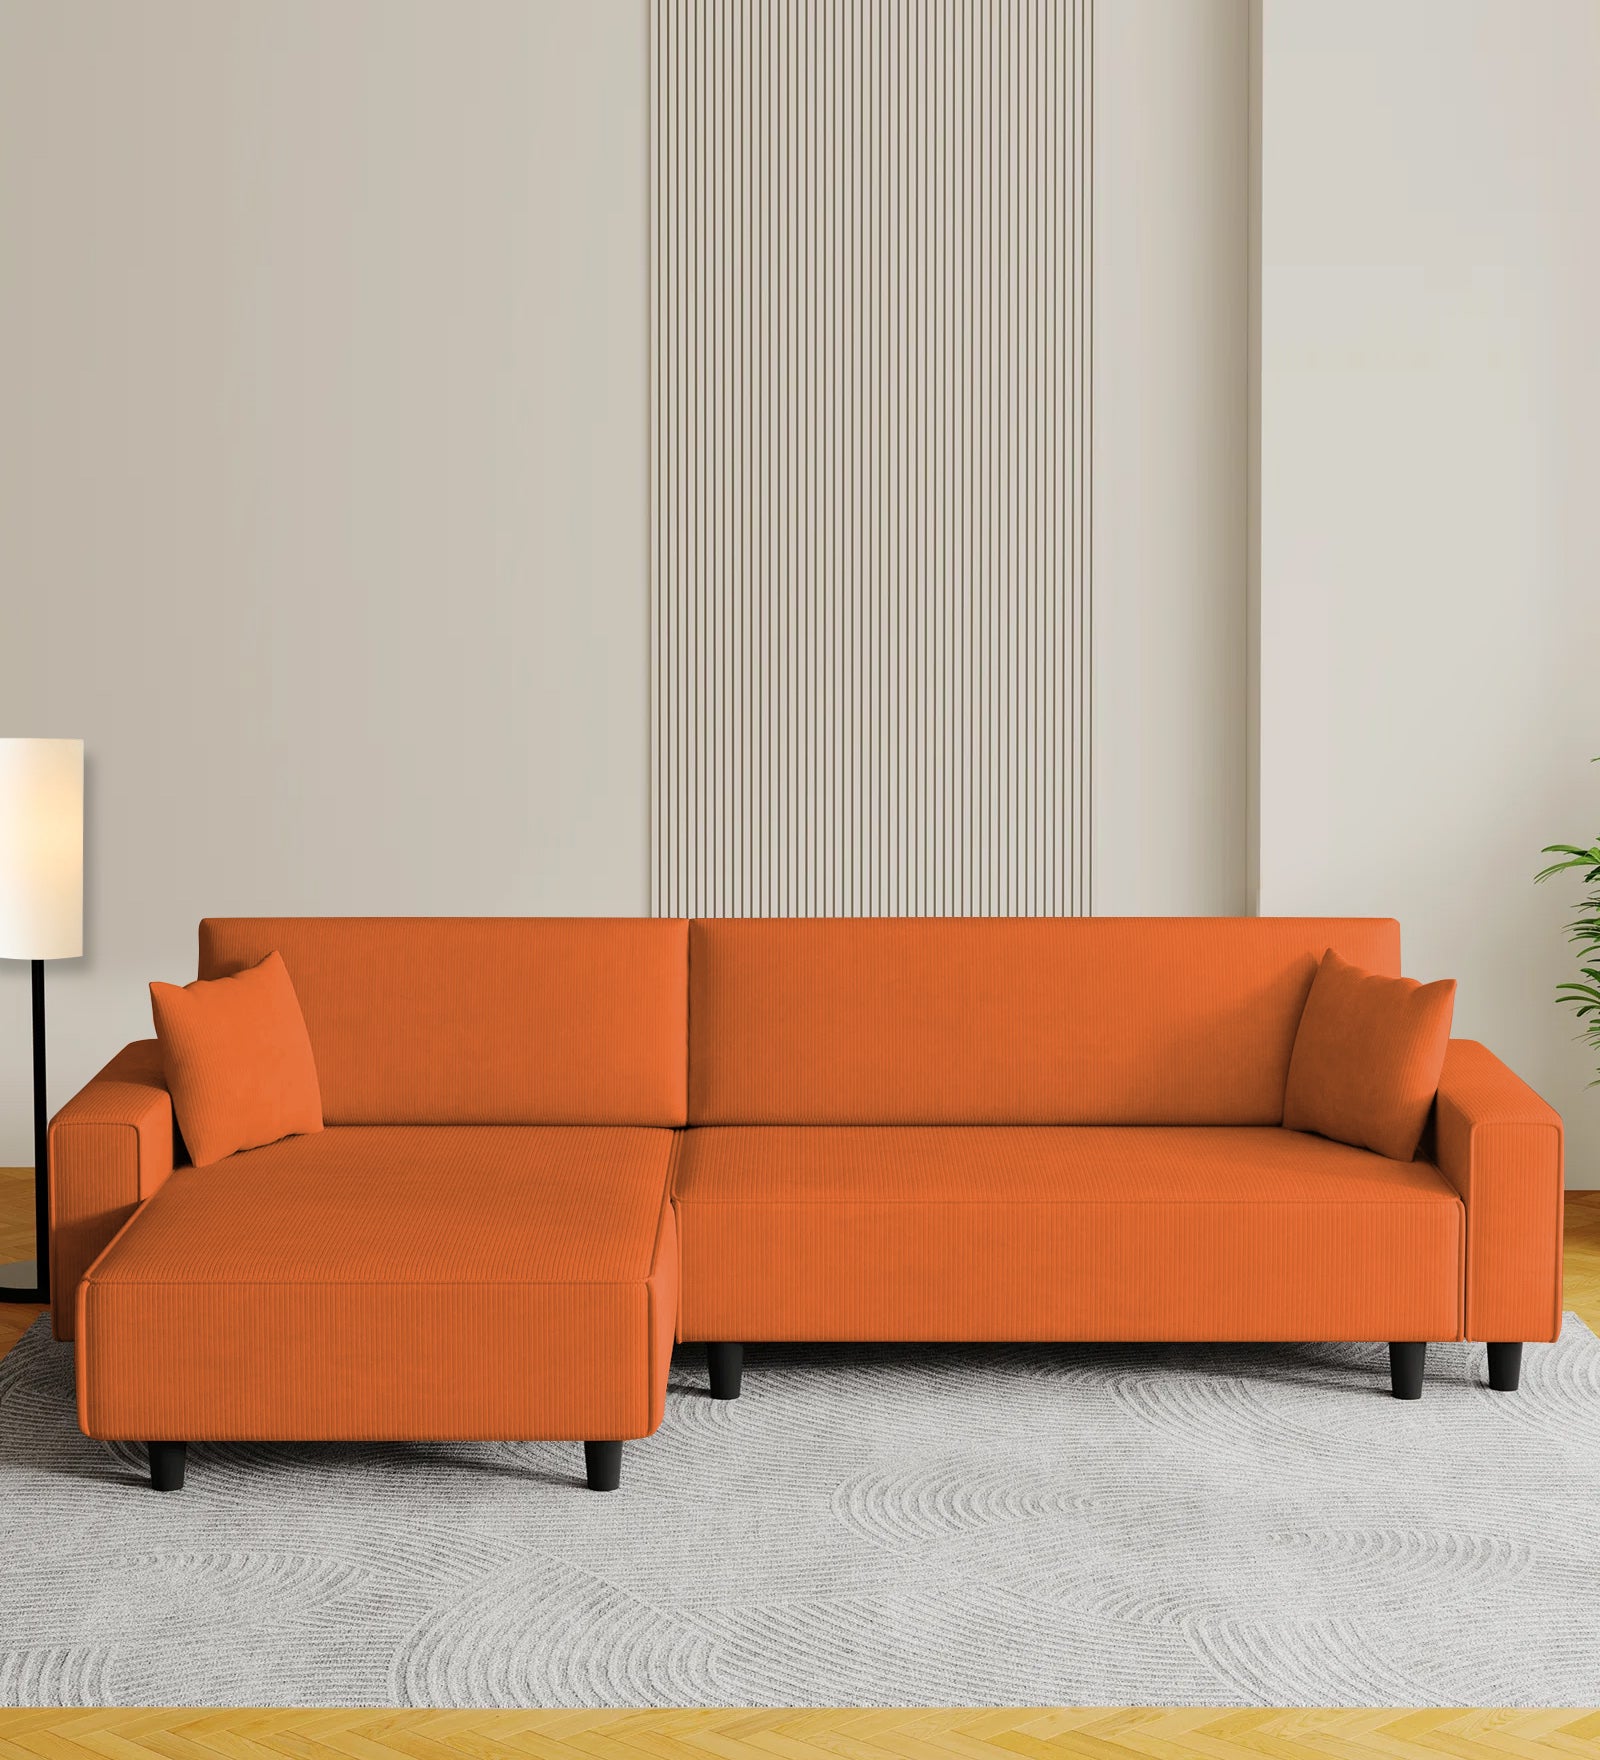 Peach Fabric RHS 6 Seater Sectional Sofa Cum Bed With Storage In Vivid Orange Colour